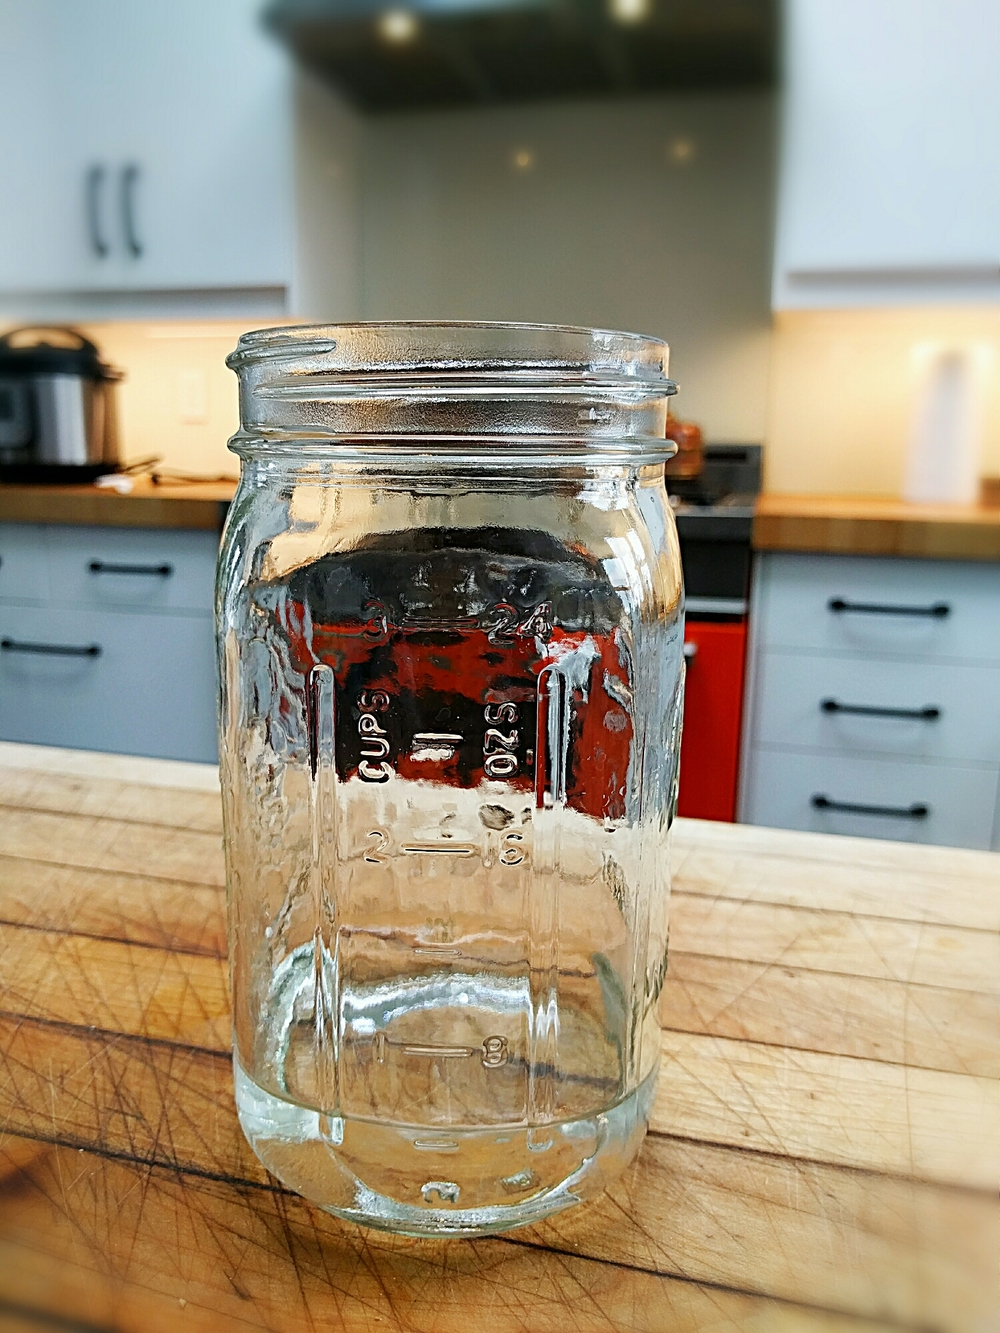 My water glass is a quart Mason jar. Four of these=one gallon.